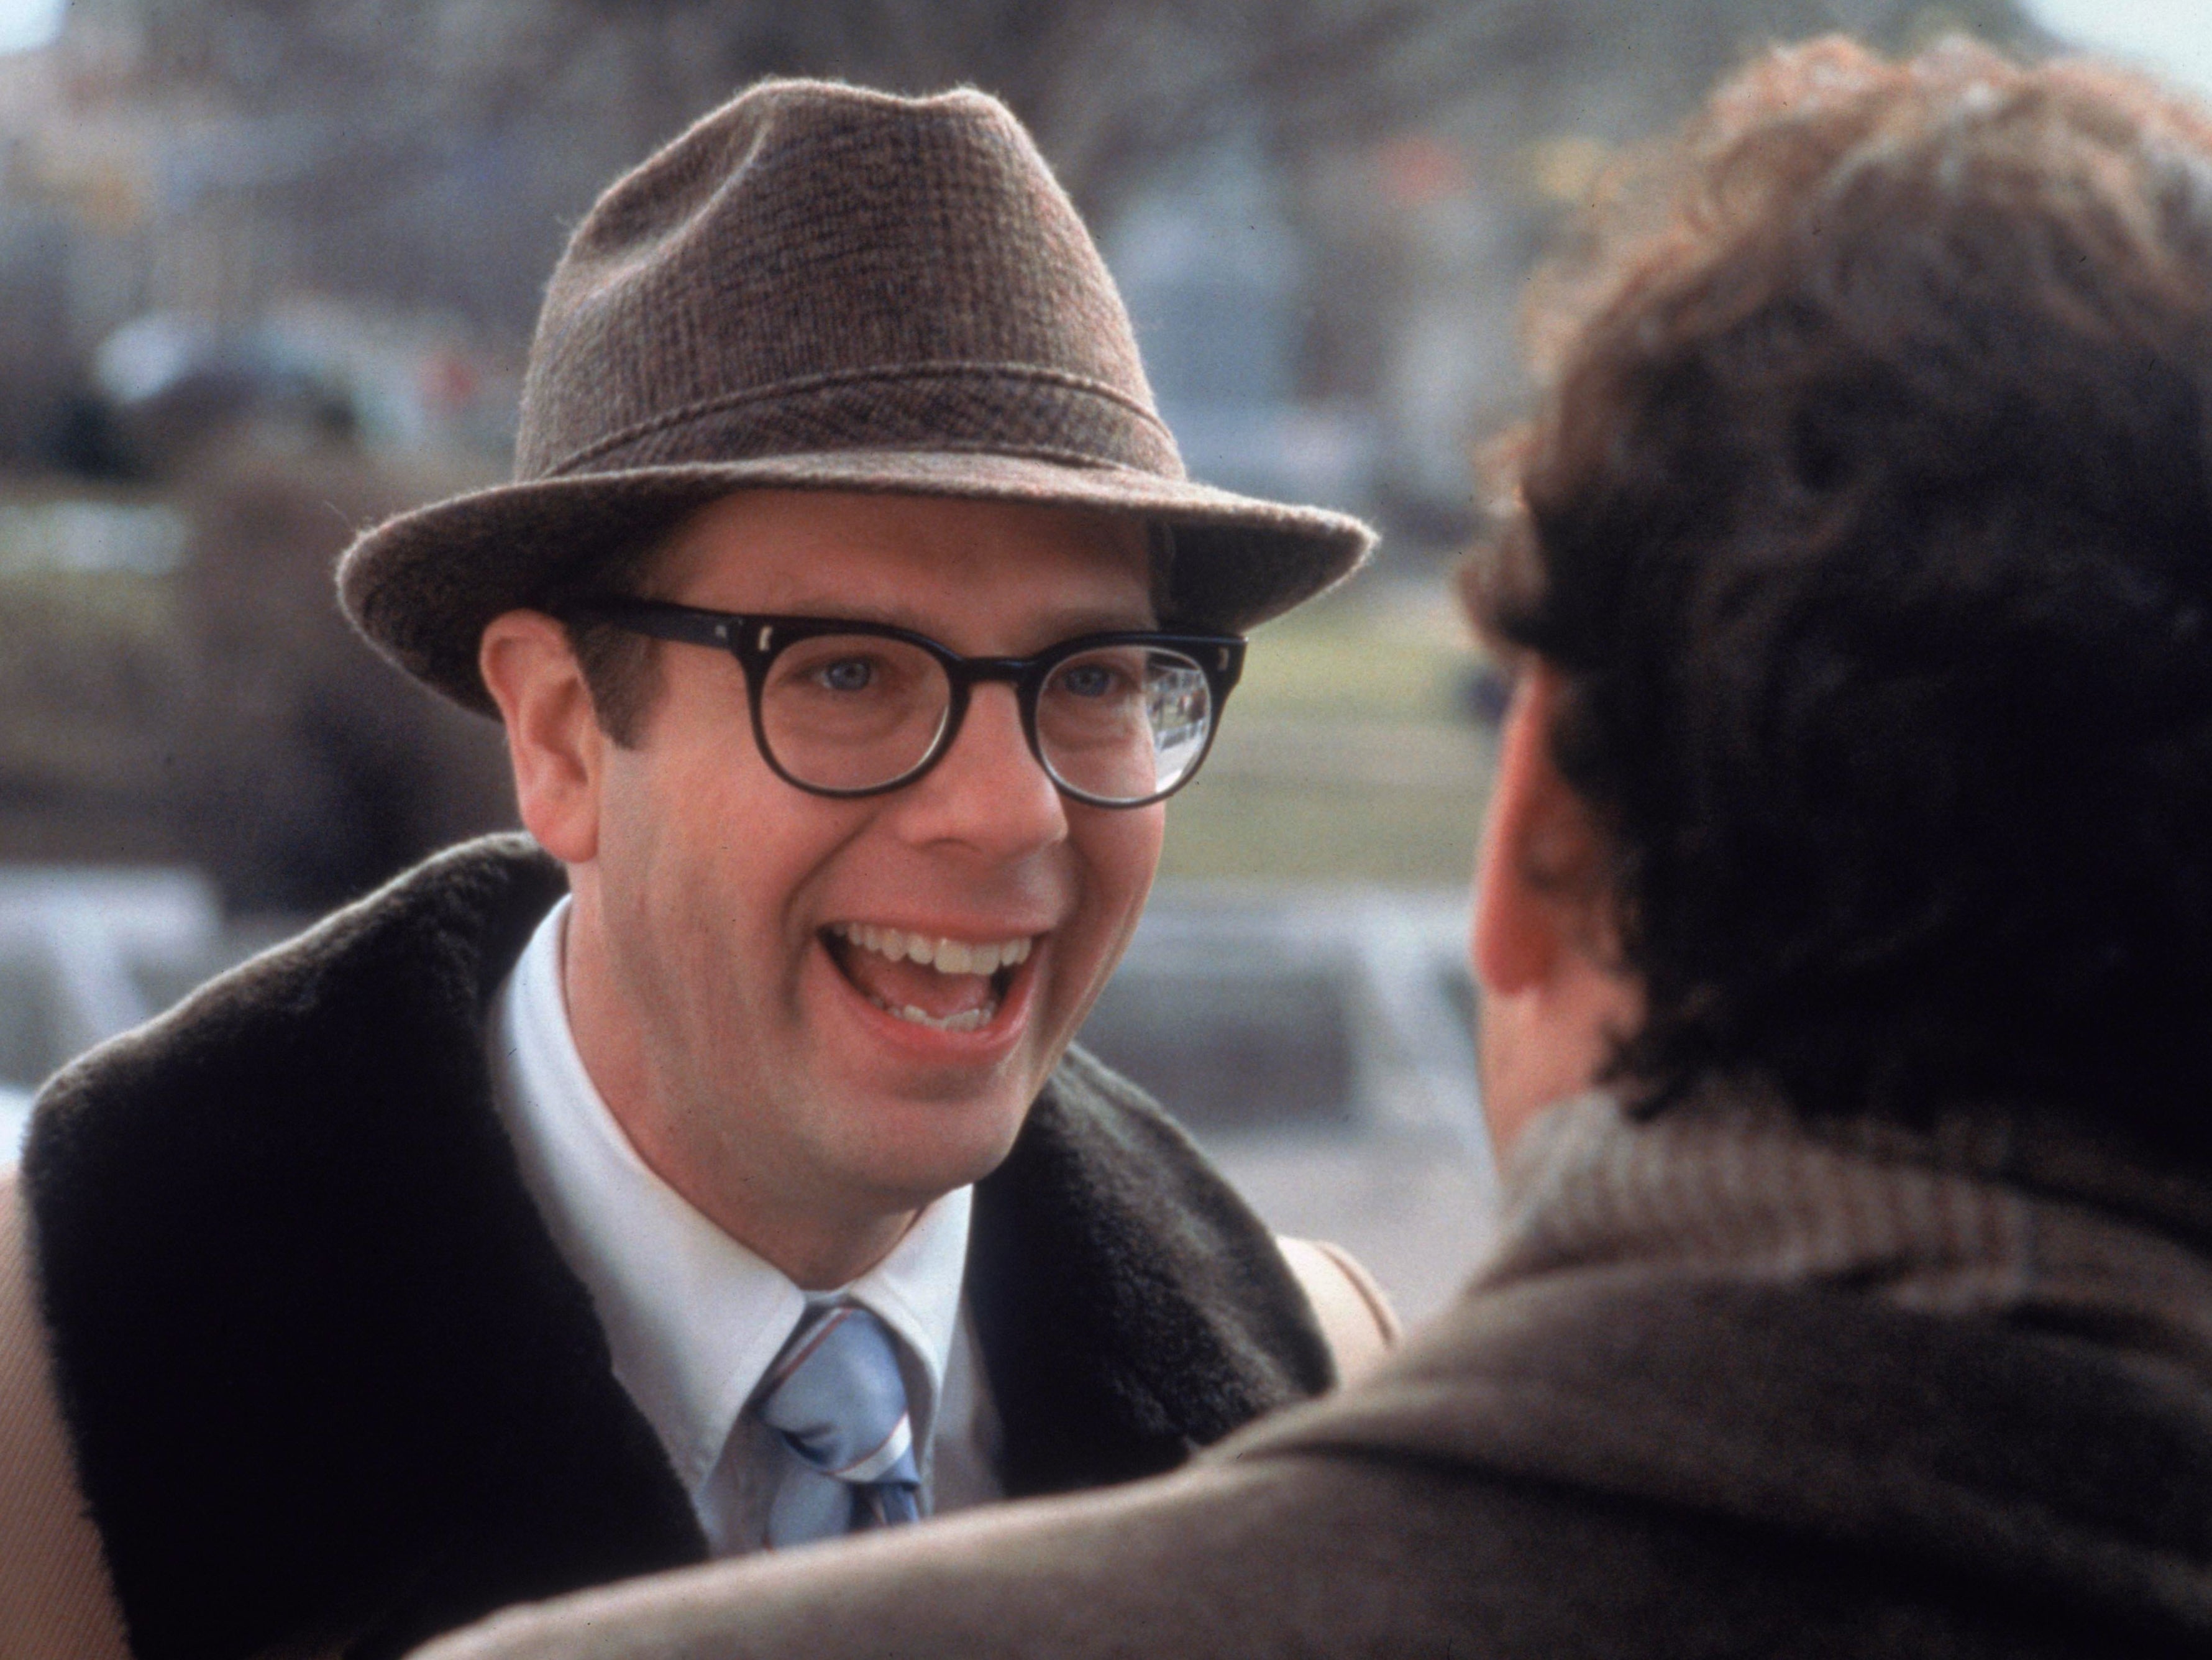 Stephen Tobolowsky as Ned Ryerson in ‘Groundhog Day’